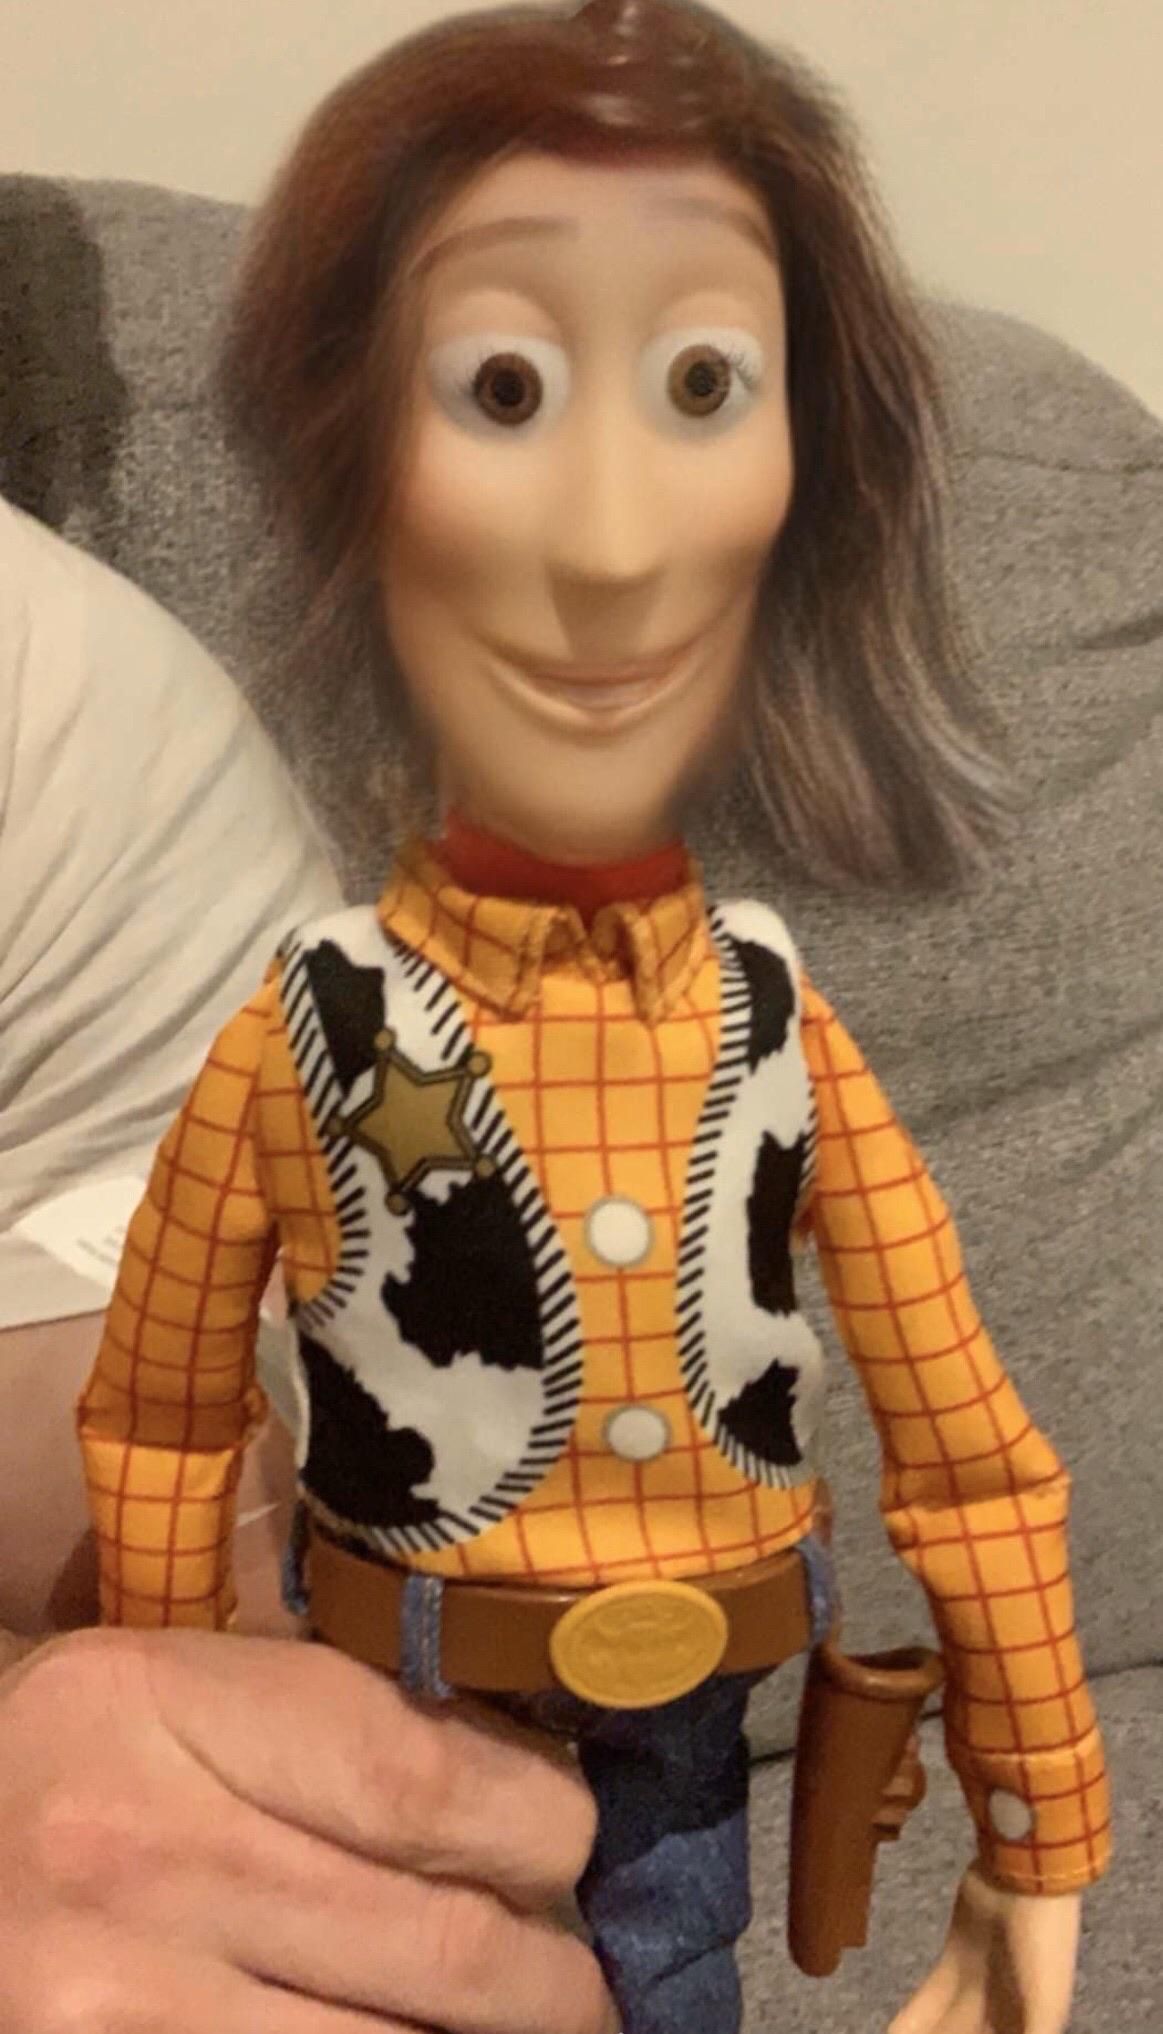 Woody with a girl filter looks like Caitlyn Jenner